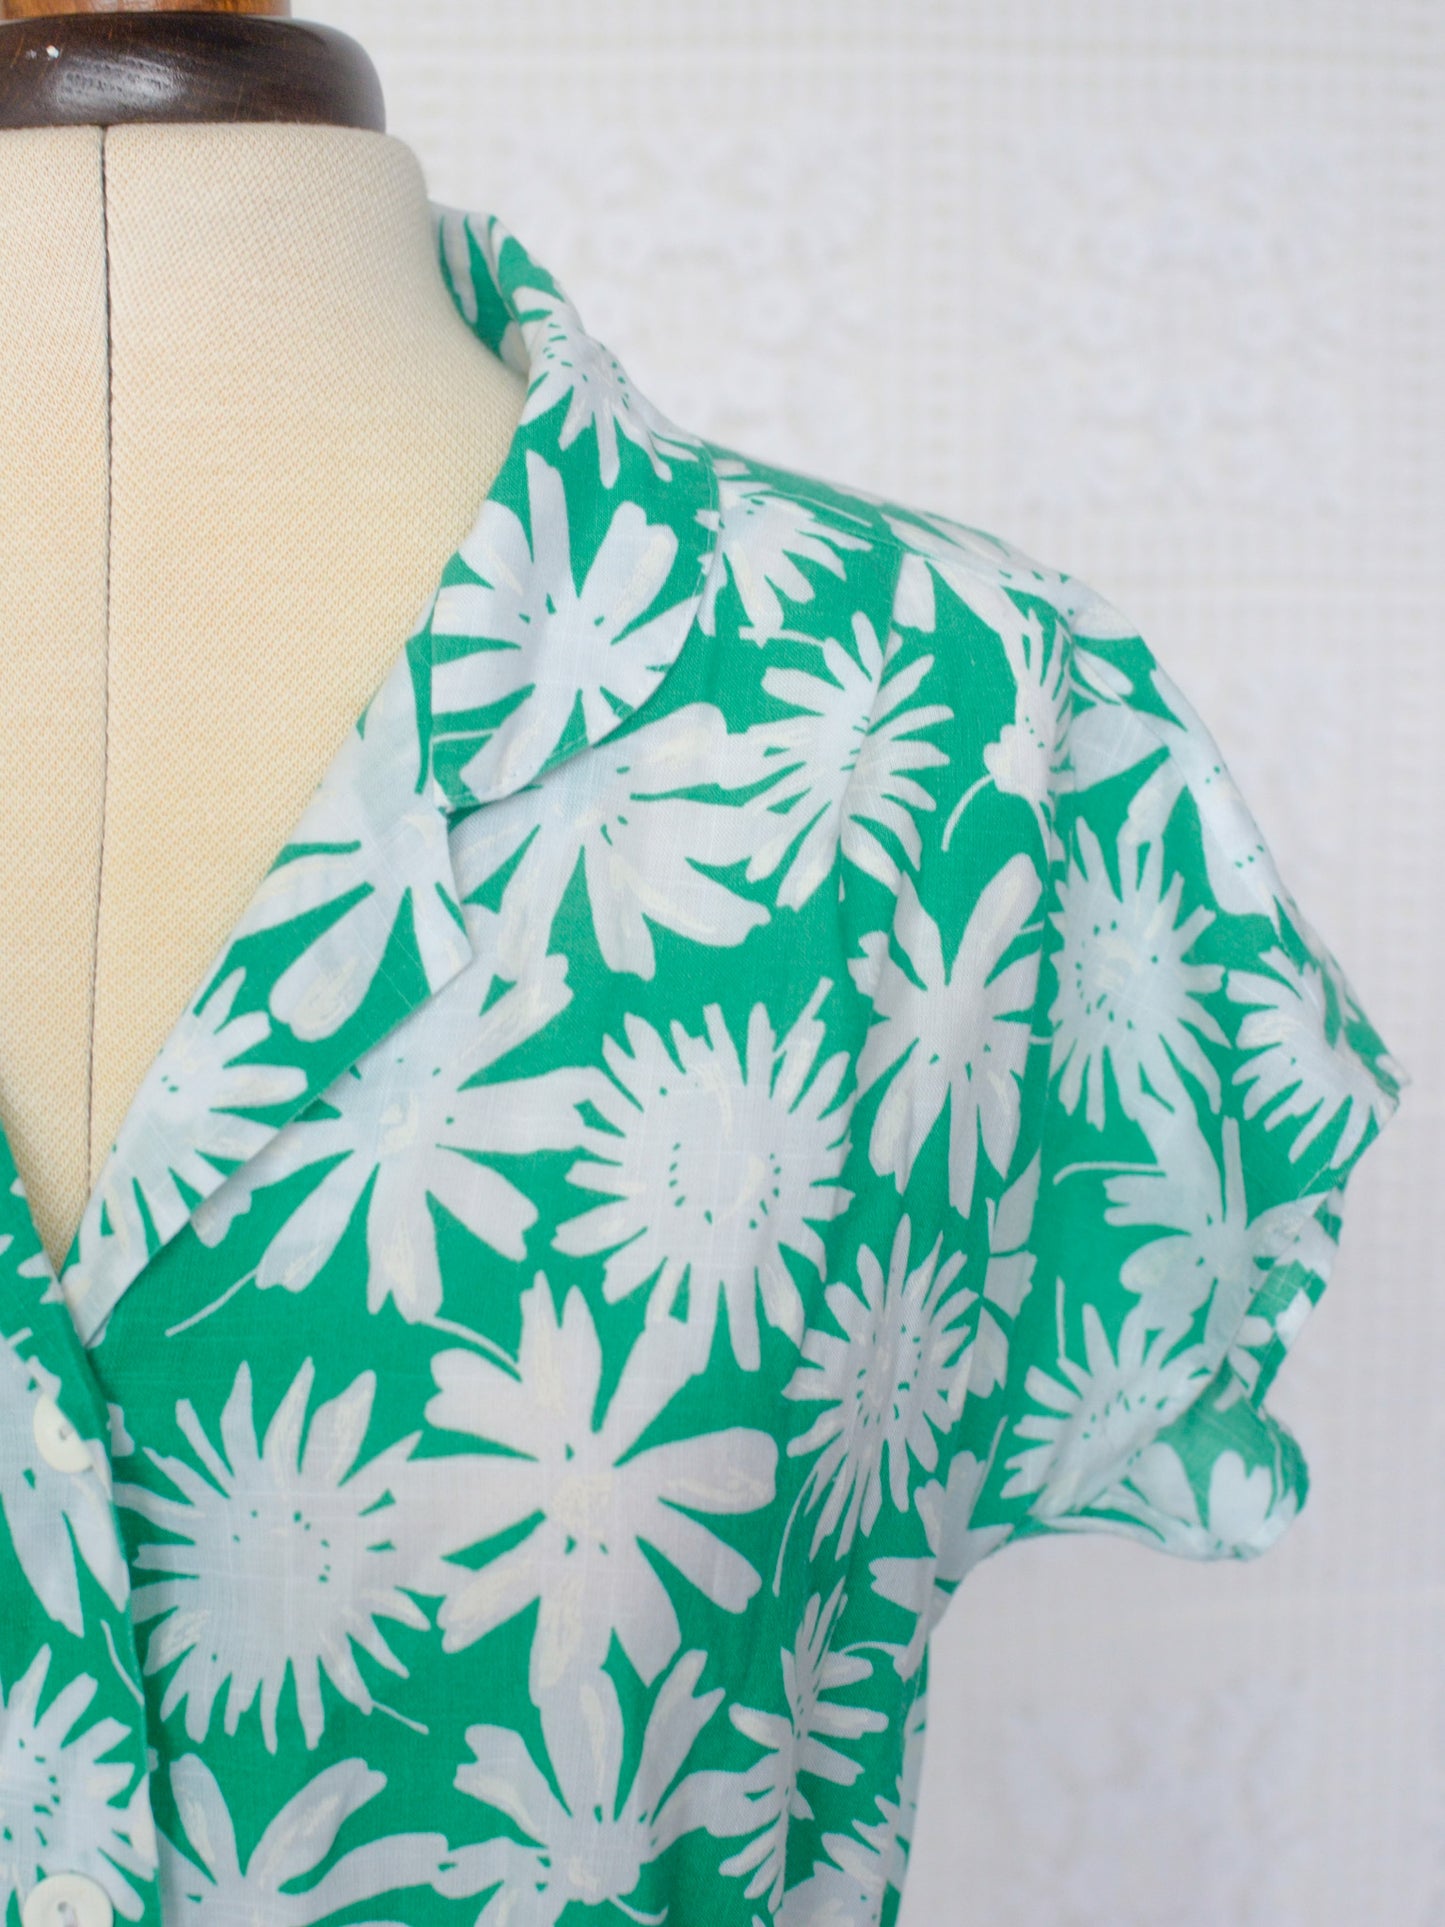 1990s St Michael green and white floral short sleeve shirt dress